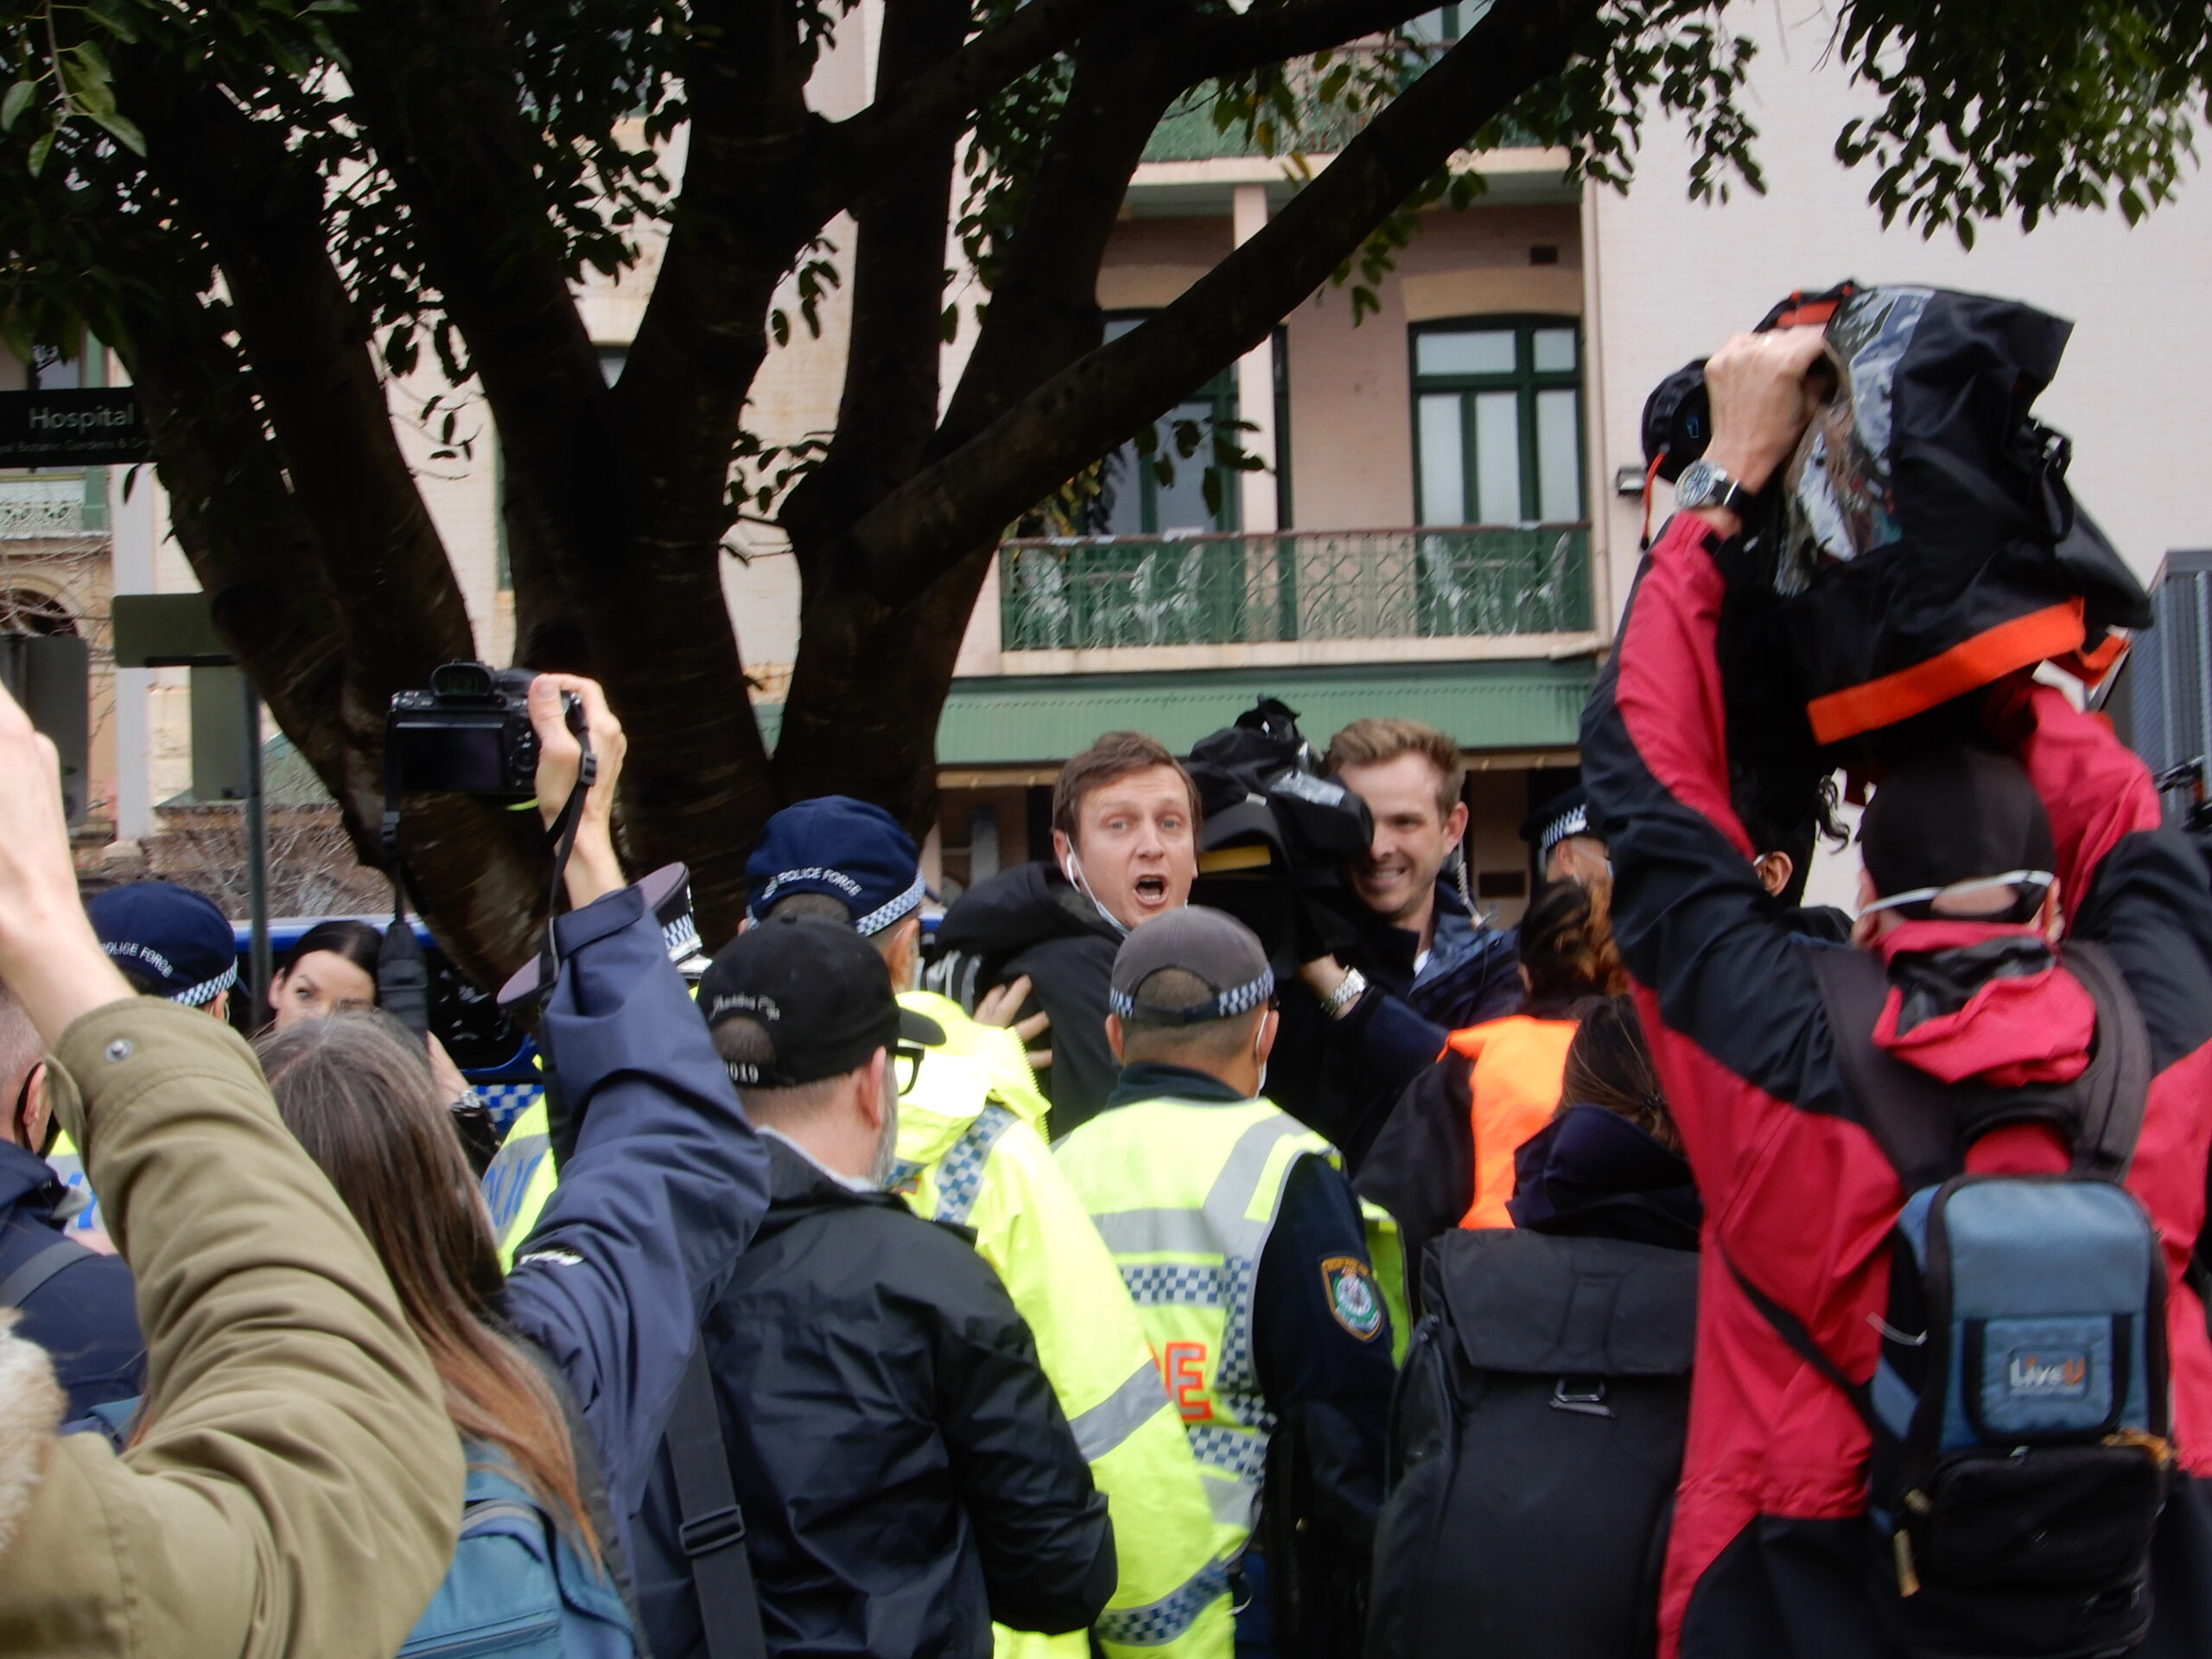 Paddy Gibson being arrested at the black lives matter protest in the domain on 28 July 2020